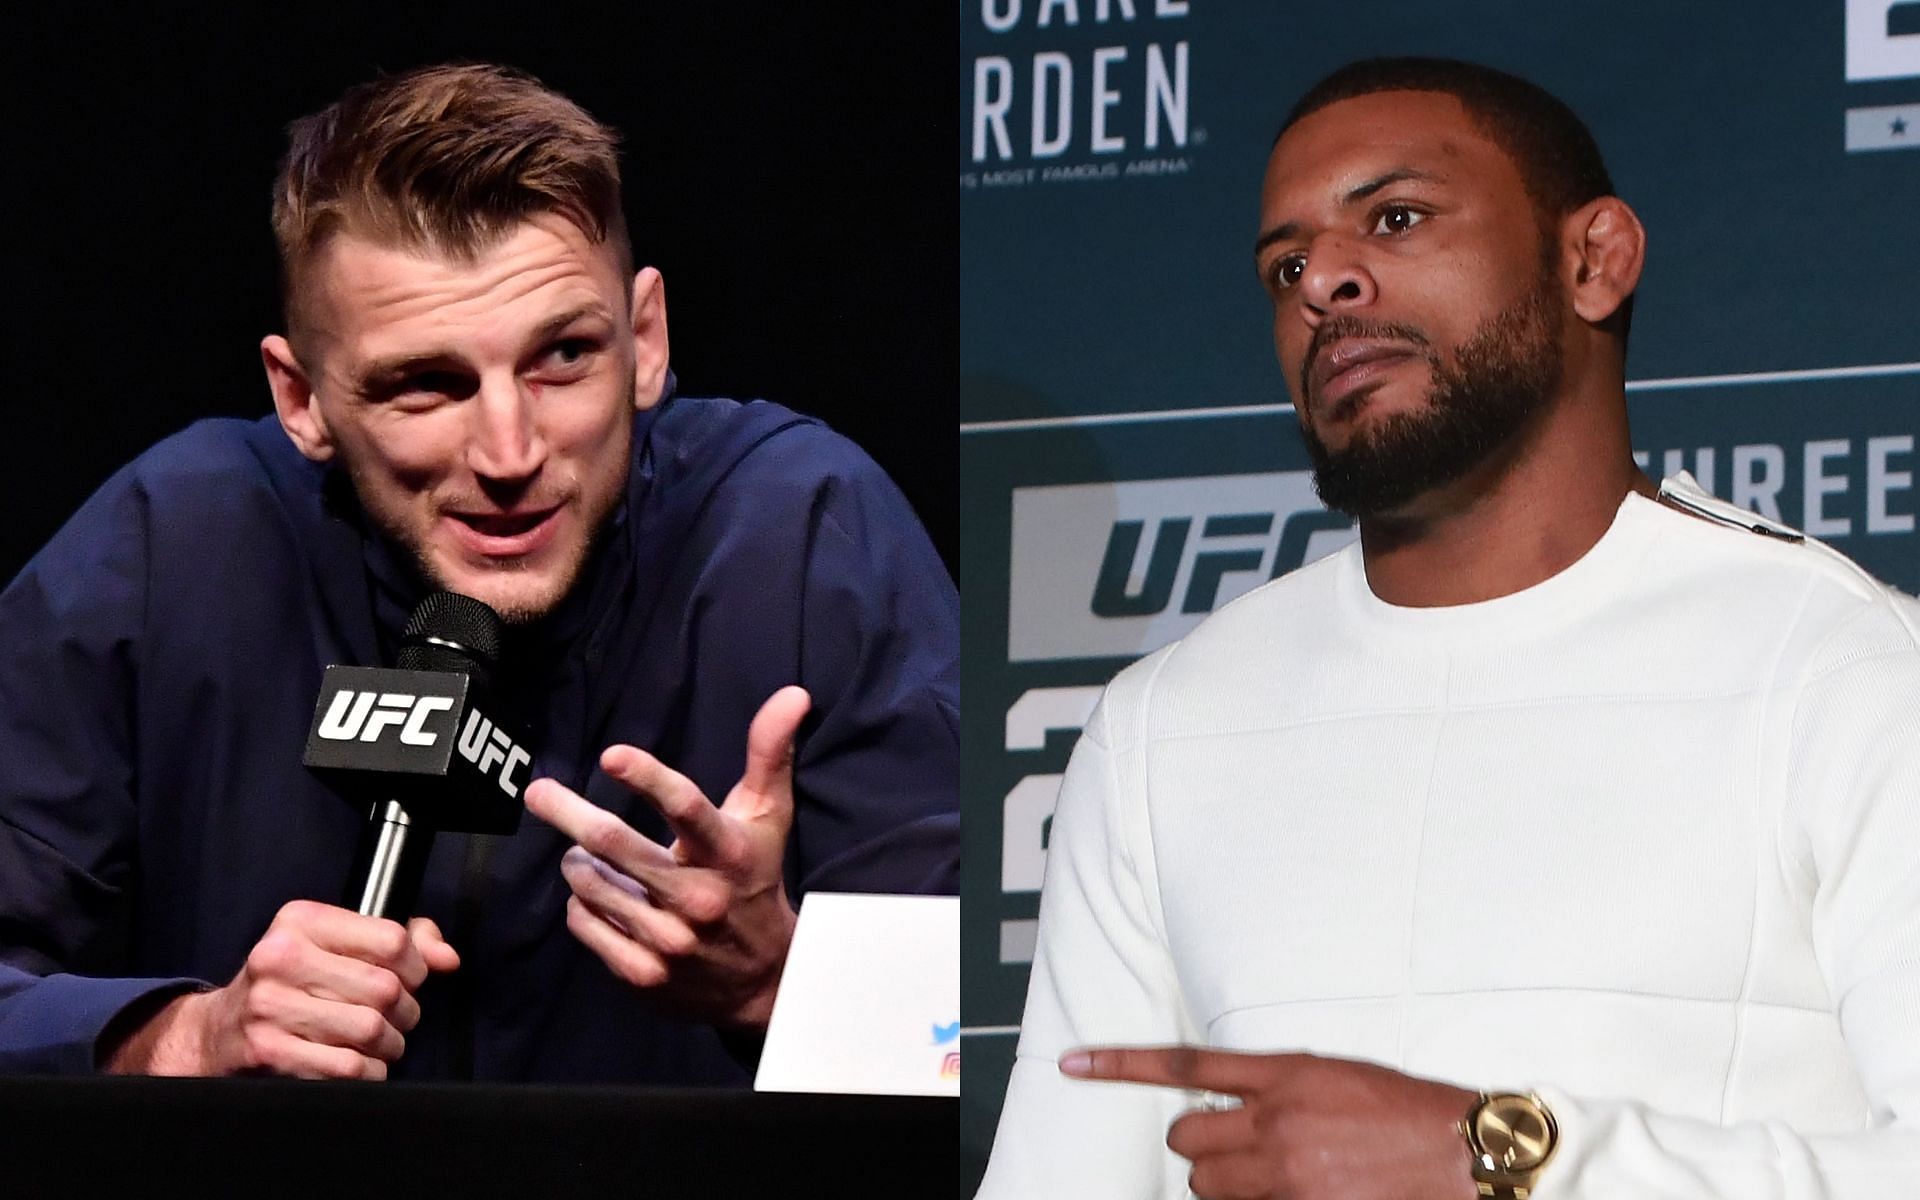 Dan Hooker (left) and Michael Johnson (right) (Images via Getty)